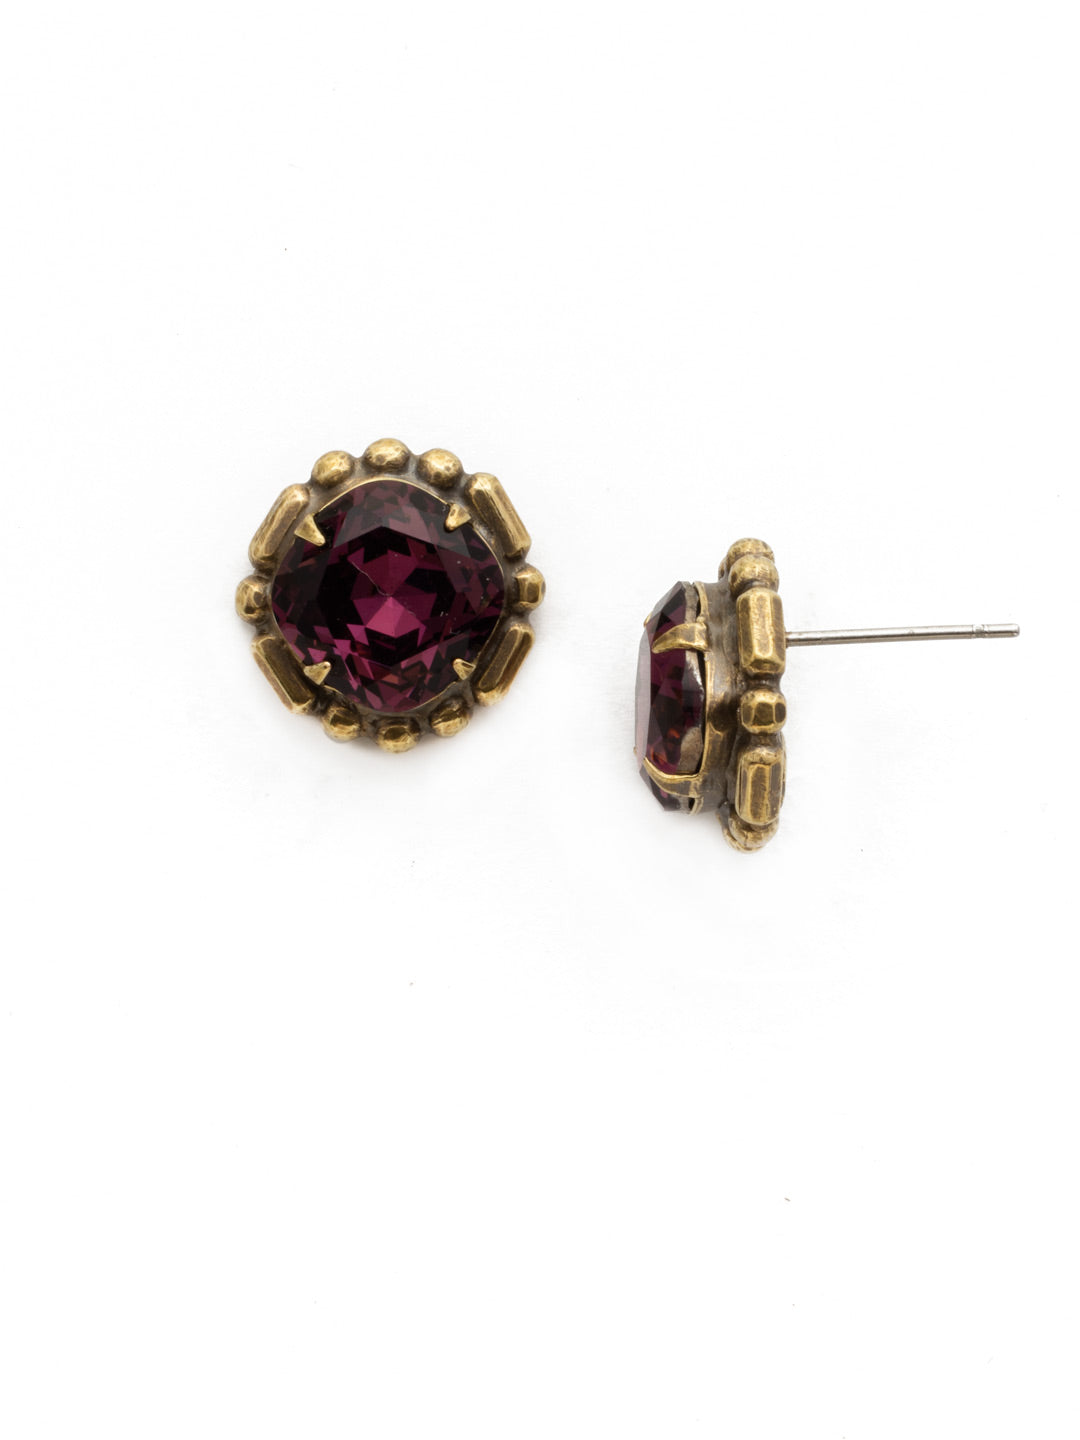 Erica Stud Earrings - EDW62AGROP - This simple stud adds just he right amount of sparkle to your ears! A mid-sized cushion cut stone is surrounded by metal detailing. From Sorrelli's Royal Plum collection in our Antique Gold-tone finish.